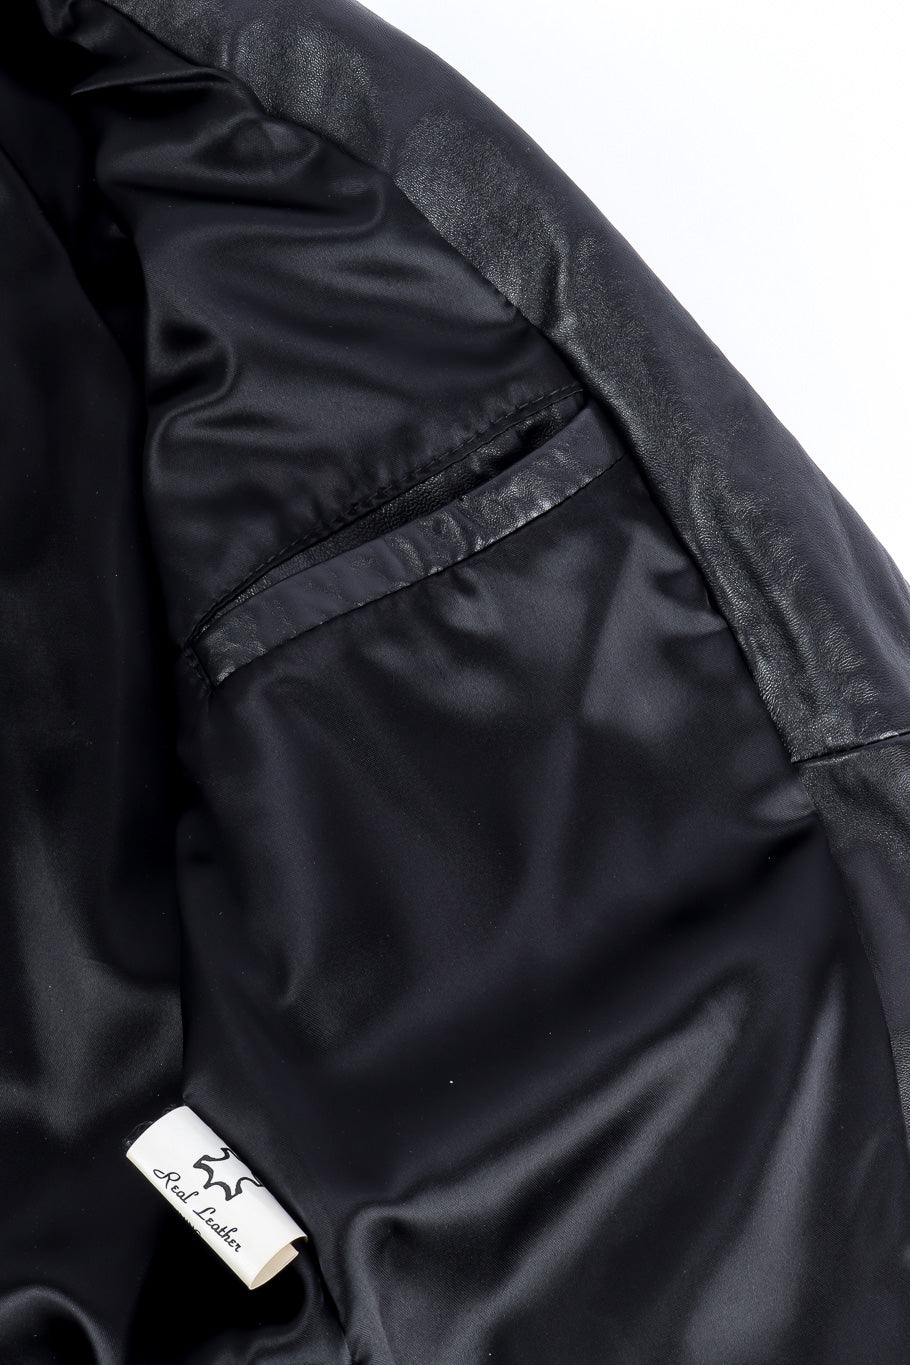 Motorcycle zip jacket by Caché unstitched lining @recessla